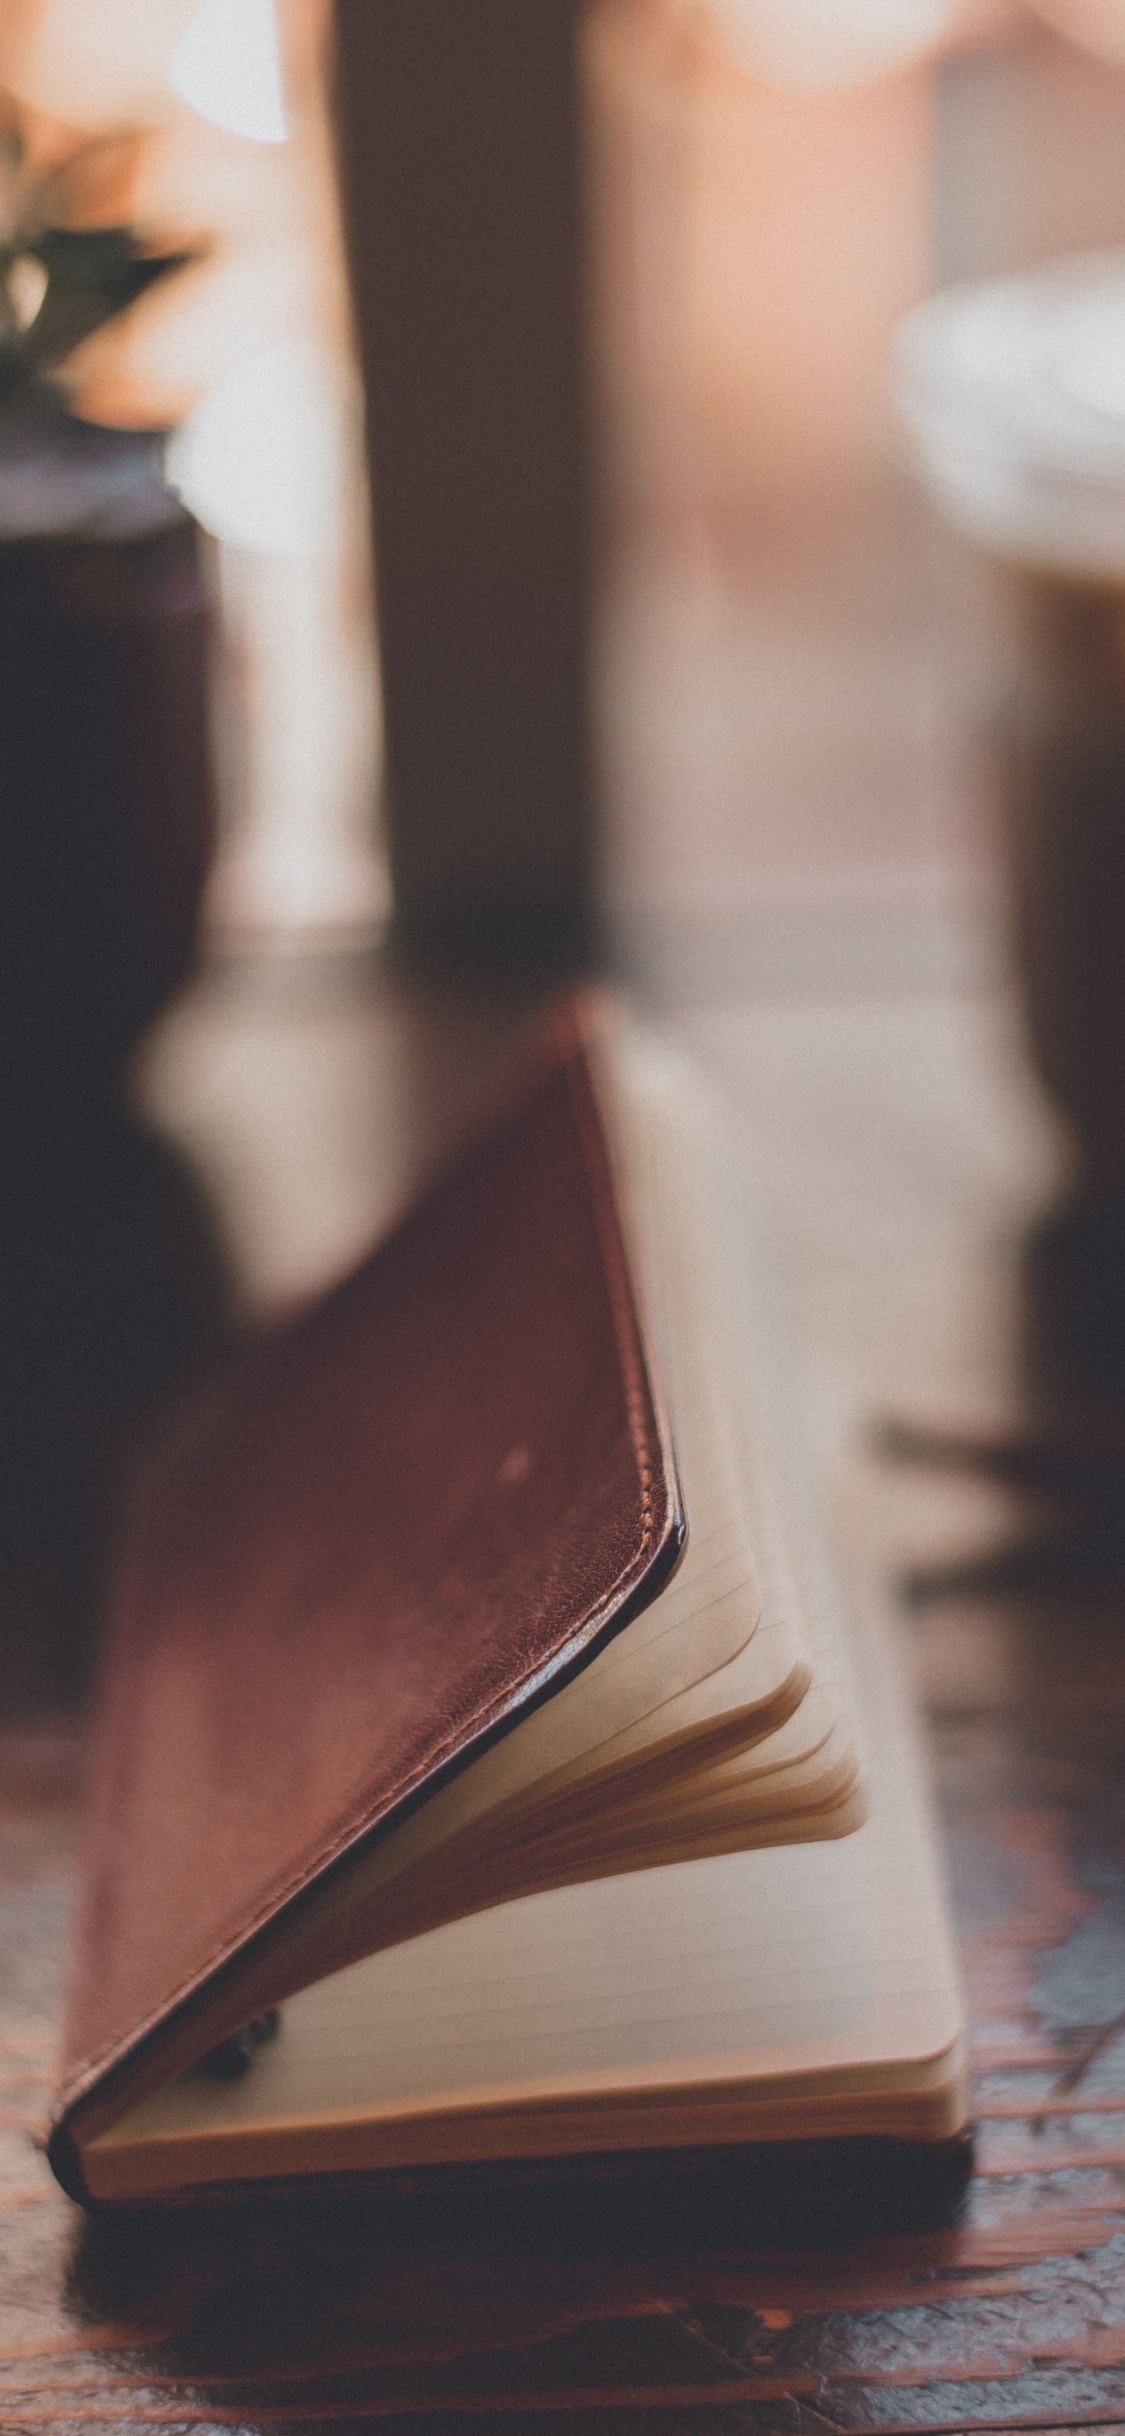 Brown Book on Brown Wooden Table. Wallpaper in 1125x2436 Resolution